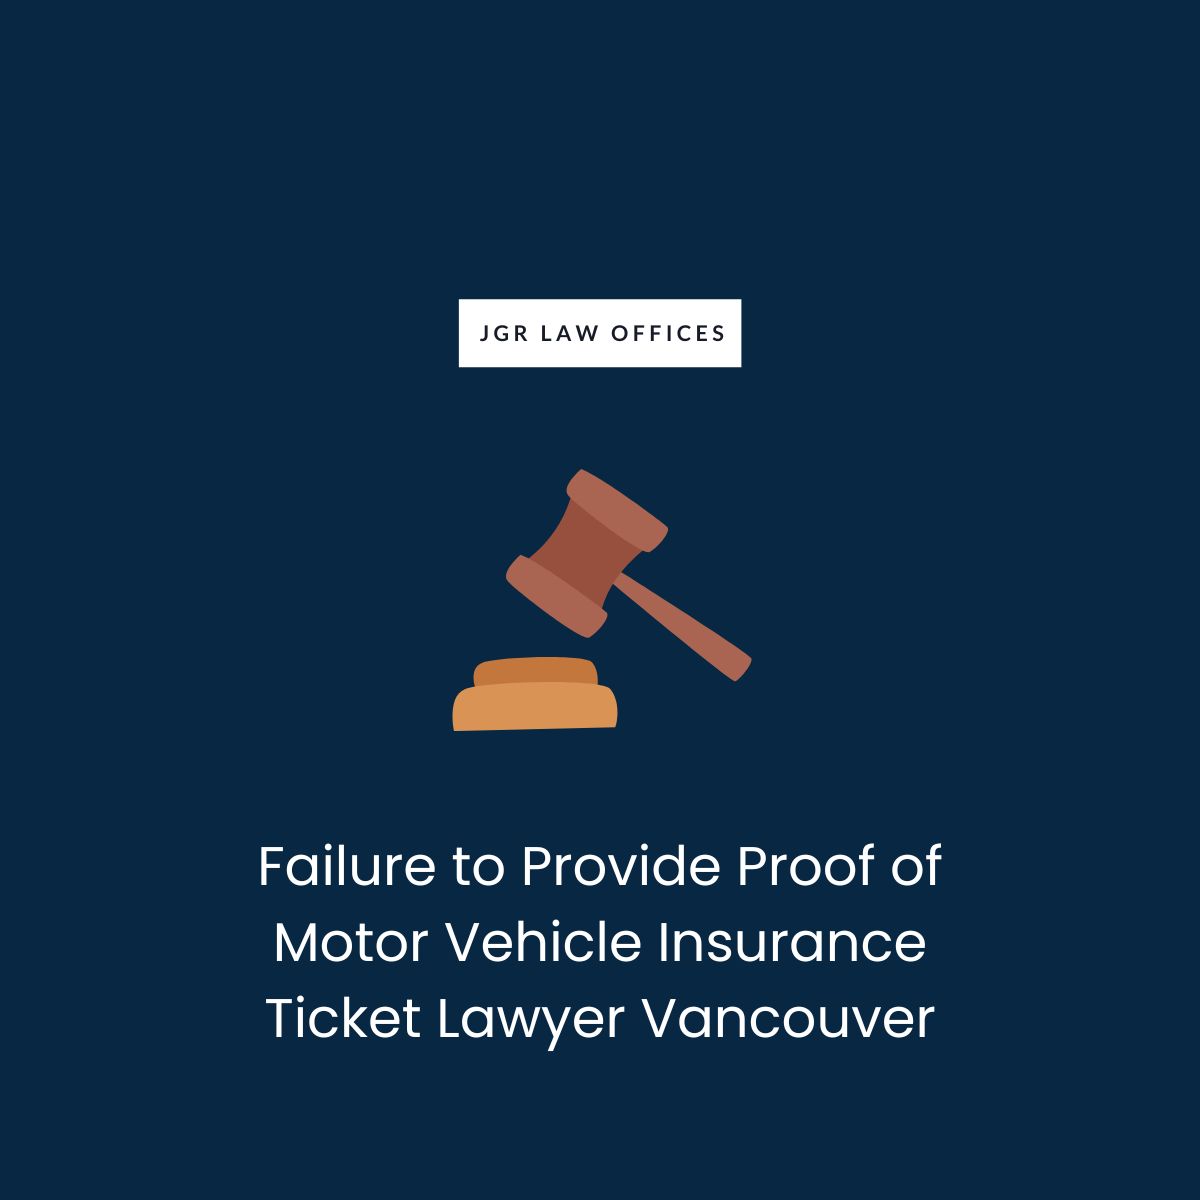 Failure to Provide Proof of Motor Vehicle Insurance Ticket Attorney Vancouver Failure to Provide Proof of Motor Vehicle Insurance